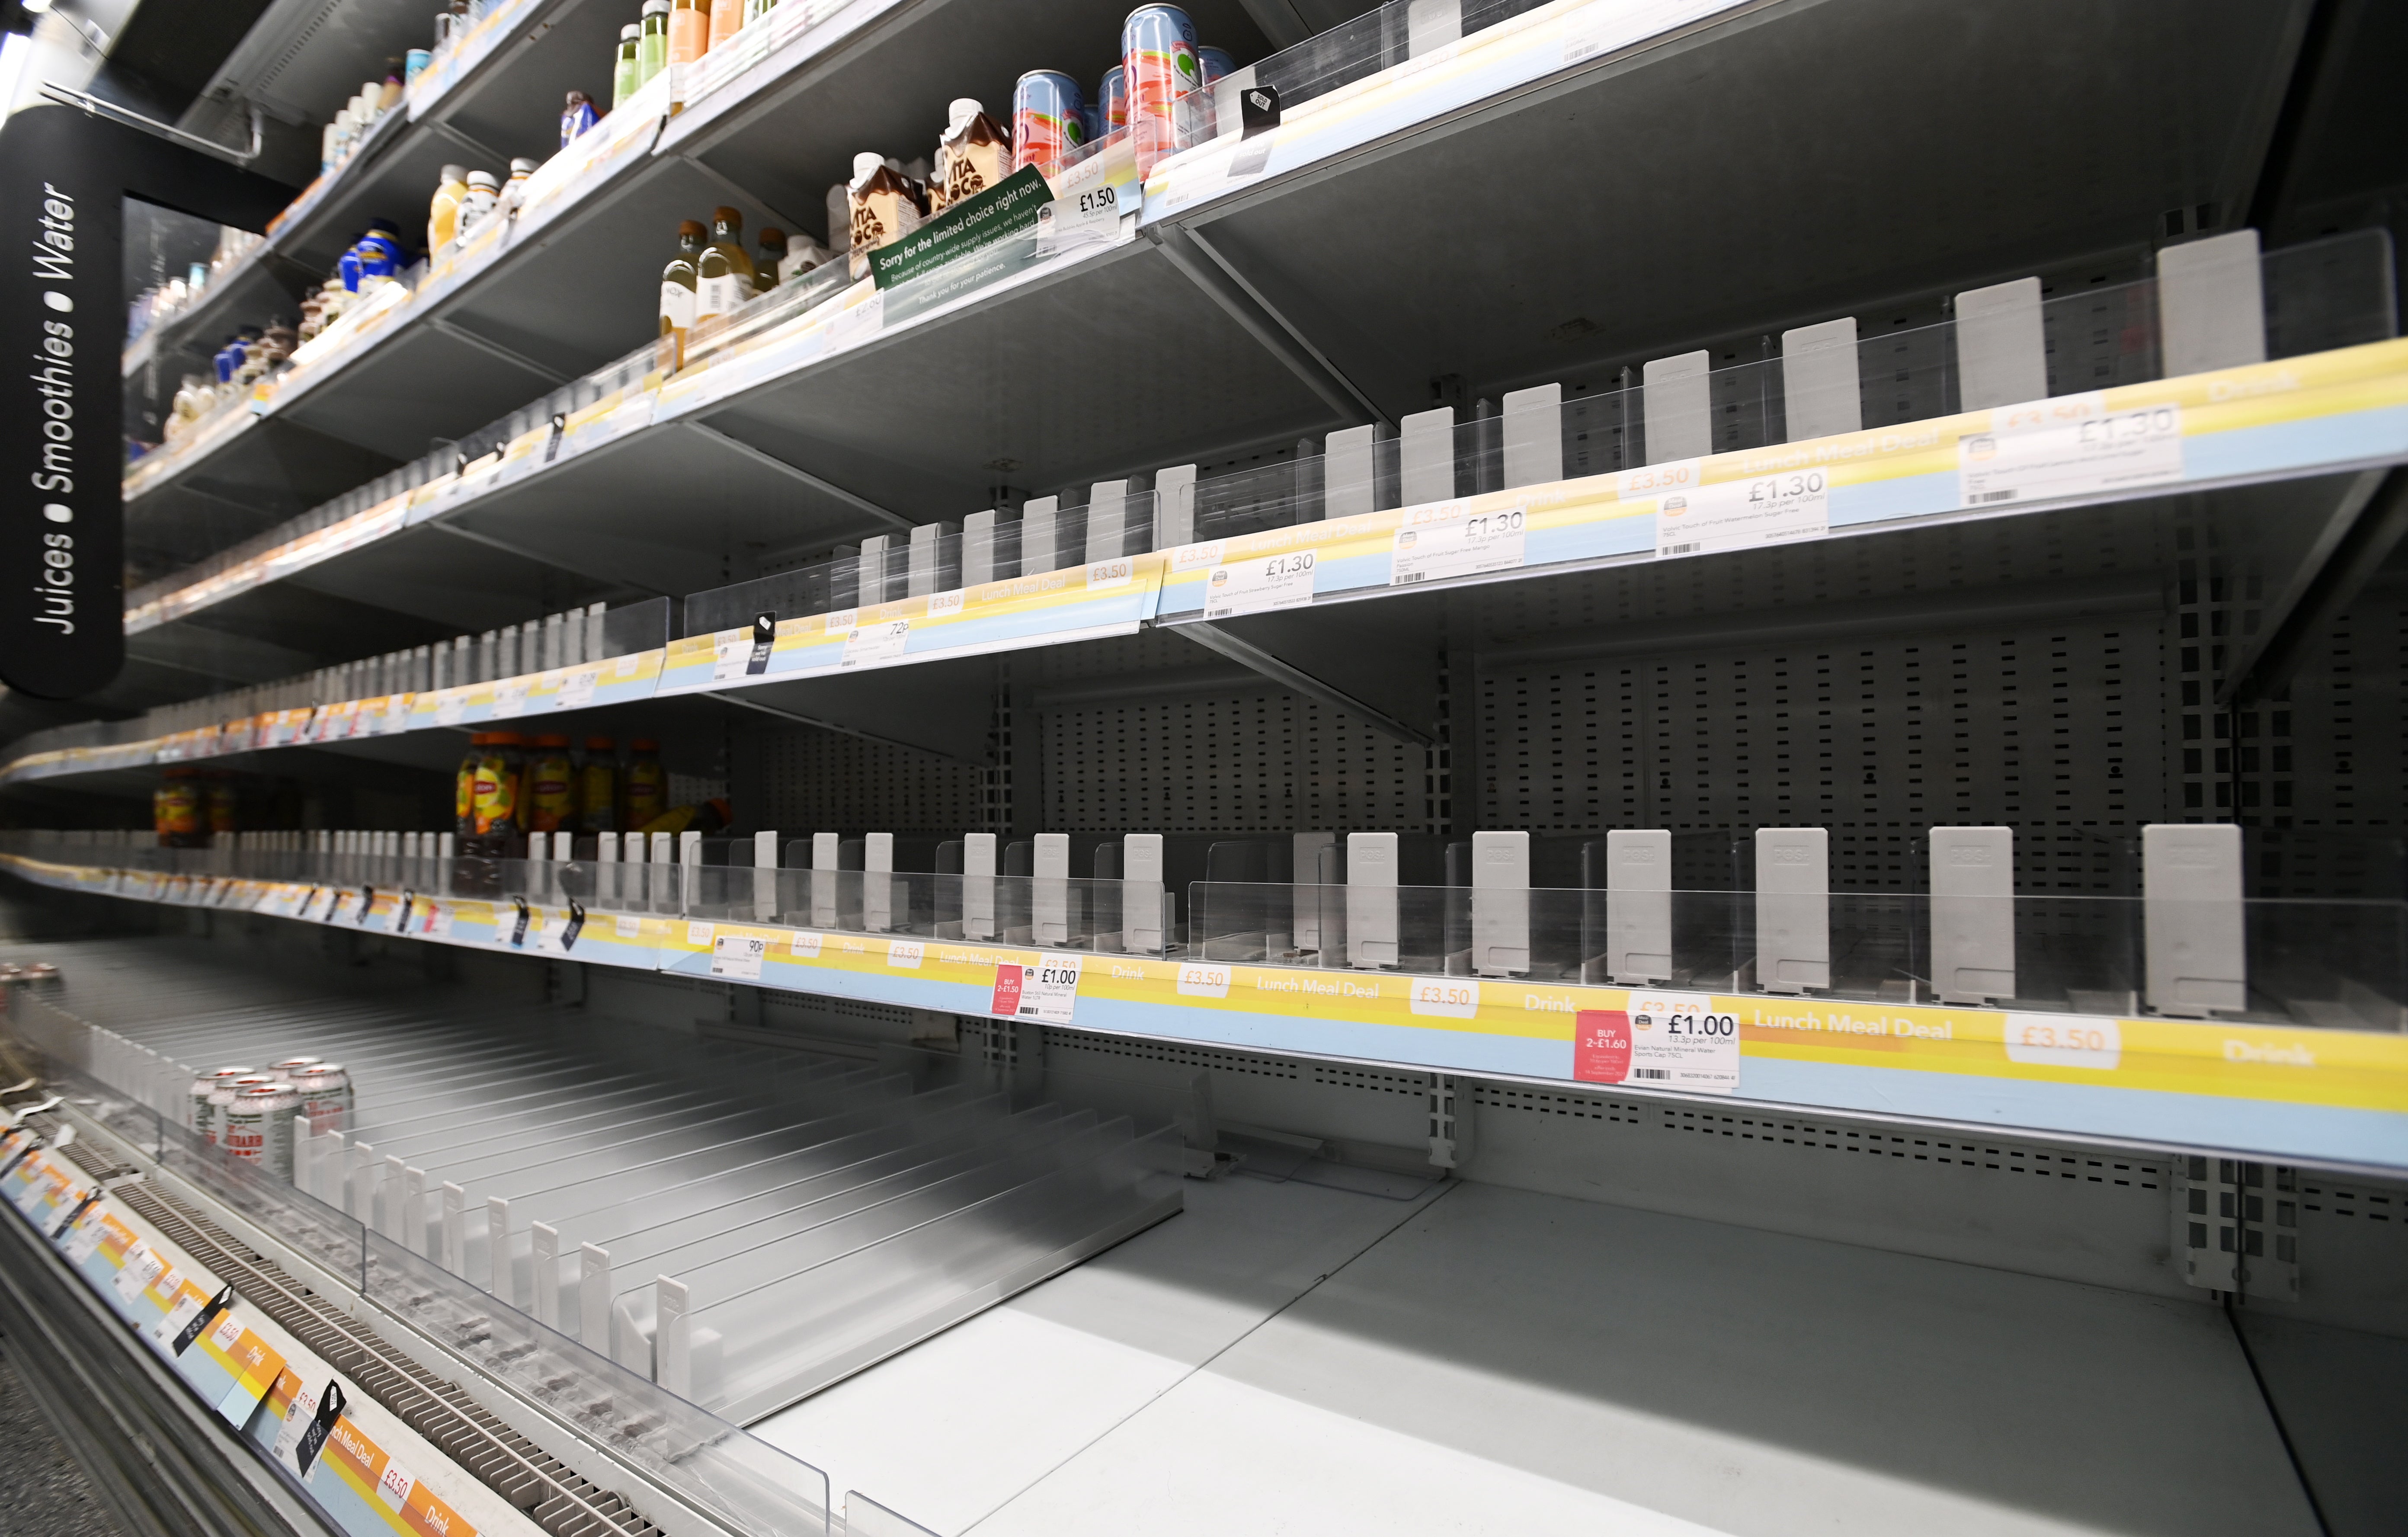 Shortages of workers in several industries have been a key cause of empty shelves